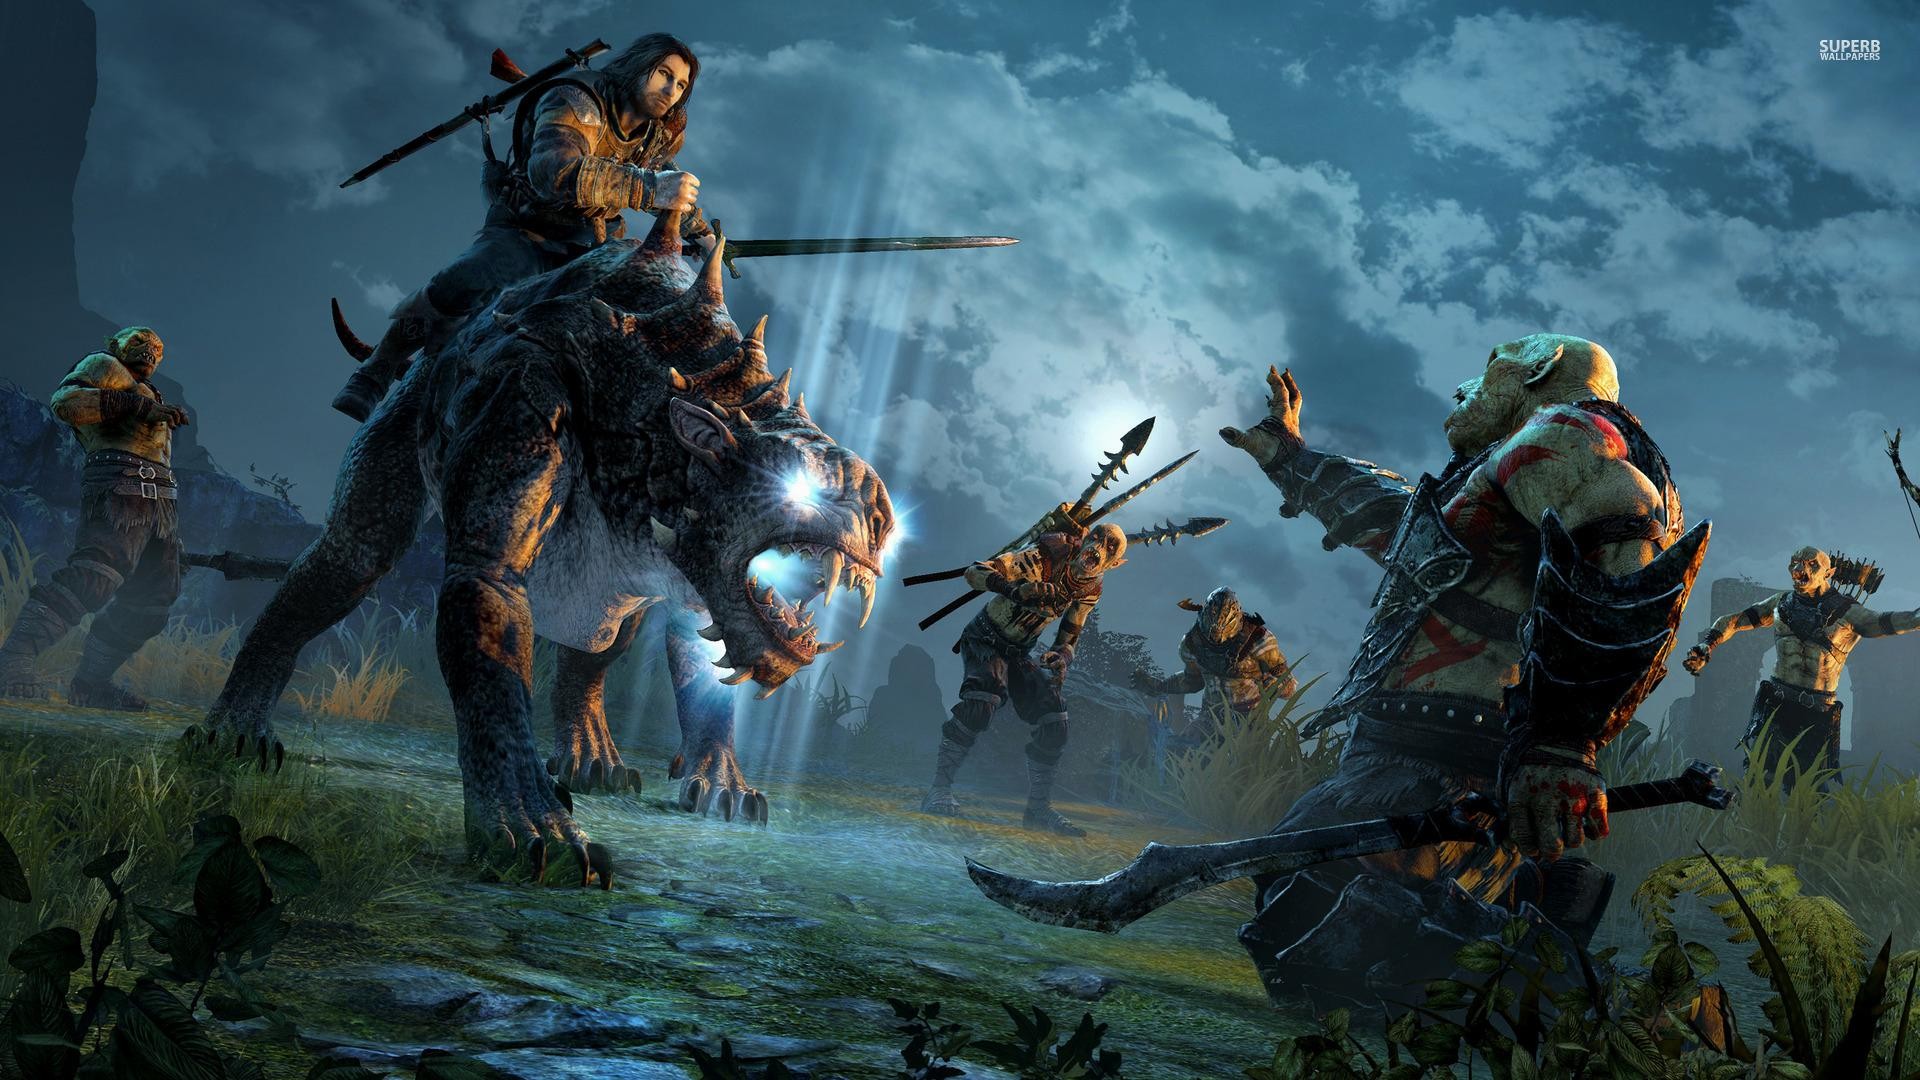 Wallpaper Download Free Amazing Backgrounds - Shadow Of Mordor - HD Wallpaper 